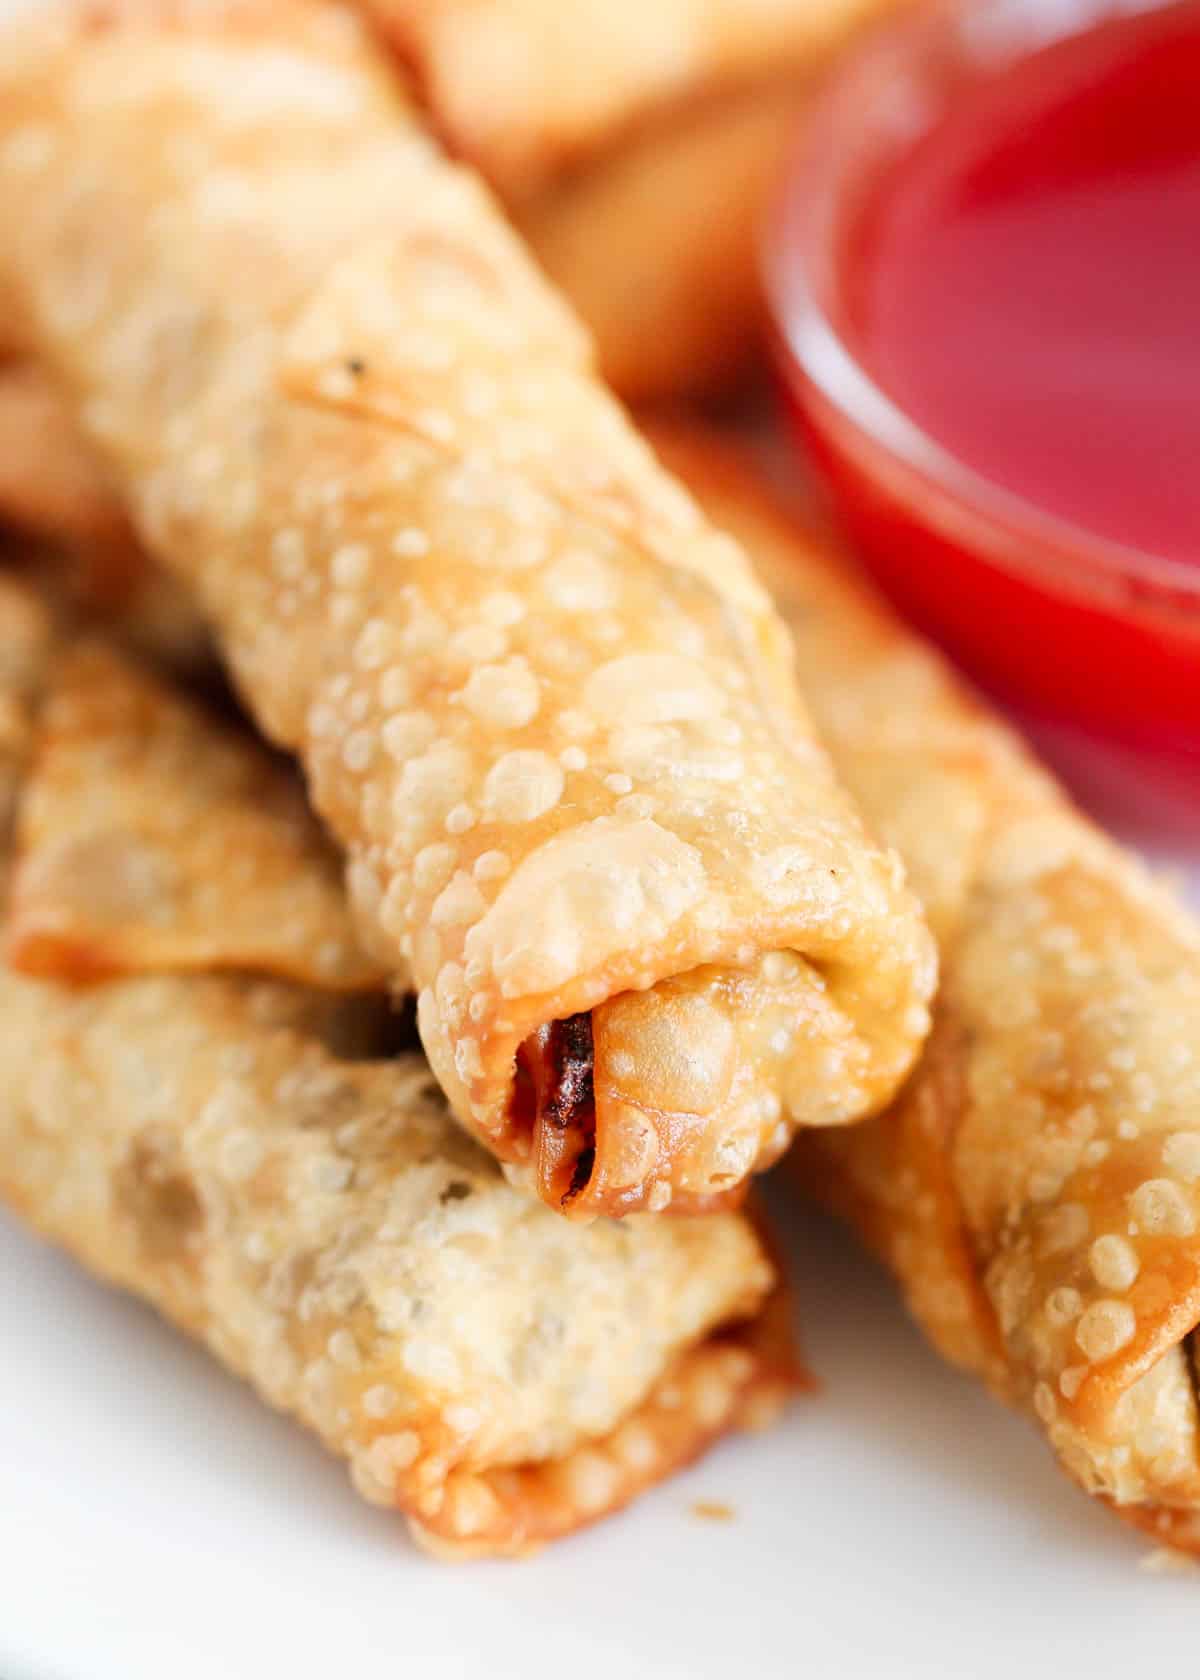 Upclose photo of egg rolls stacked on top of each other with sweet and sour sauce. 